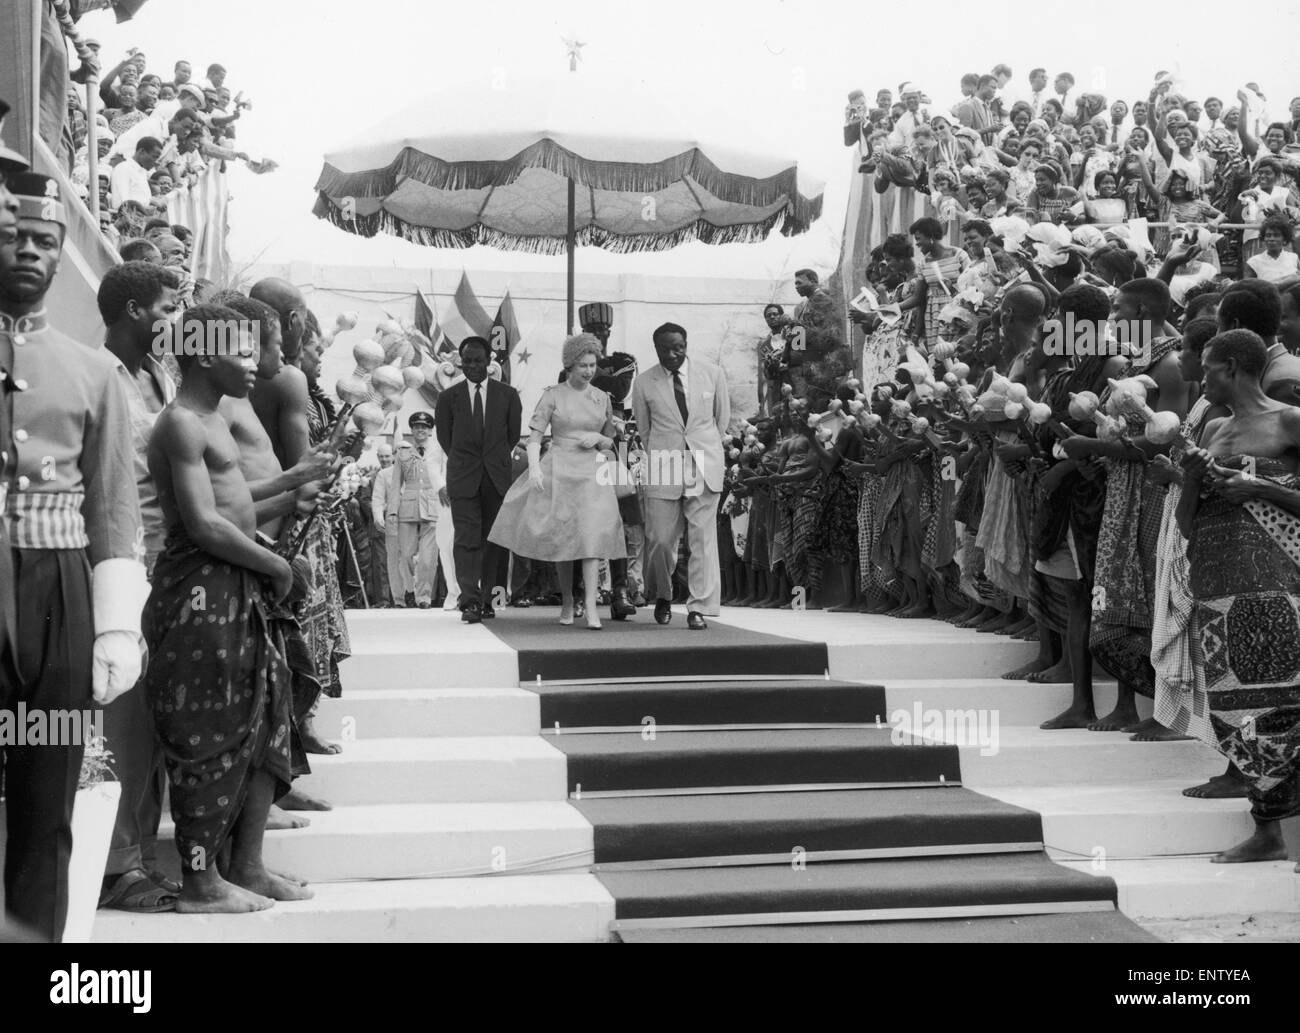 1961 and 1999: The two times Queen Elizabeth II visited Ghana